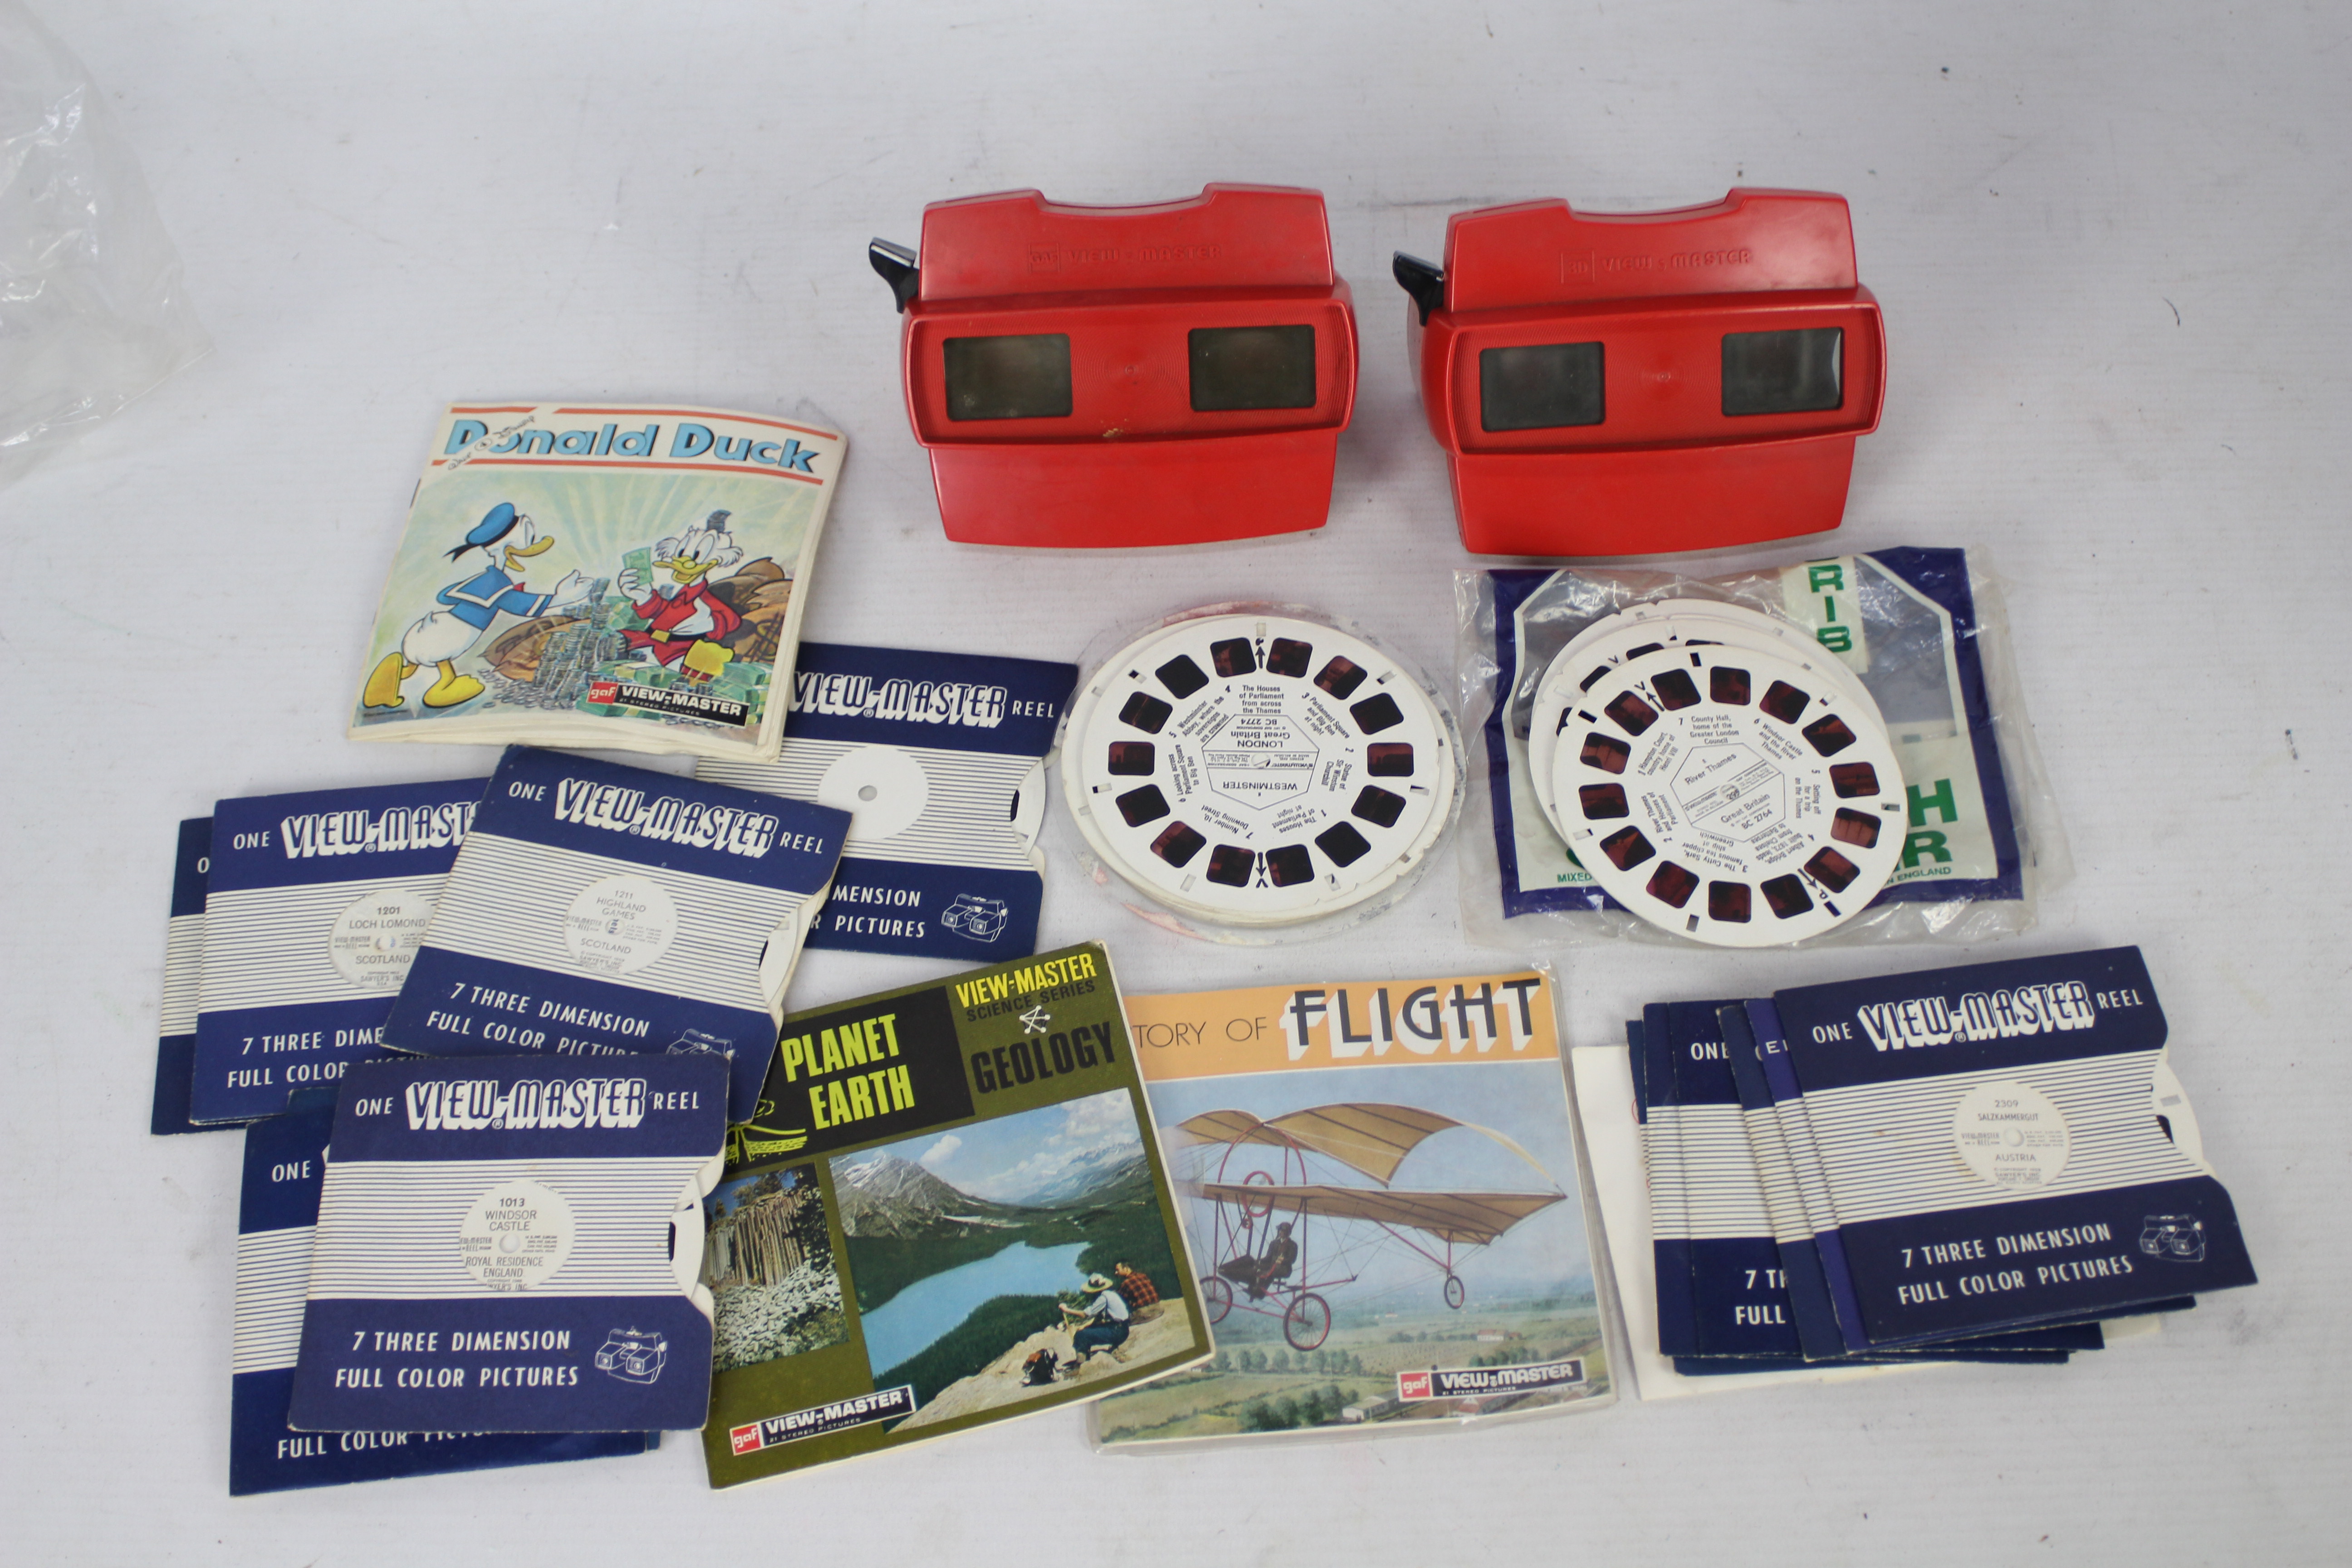 GAF - View Master - 2 x vintage View Masters with over 30 discs including ET, My Little Pony,